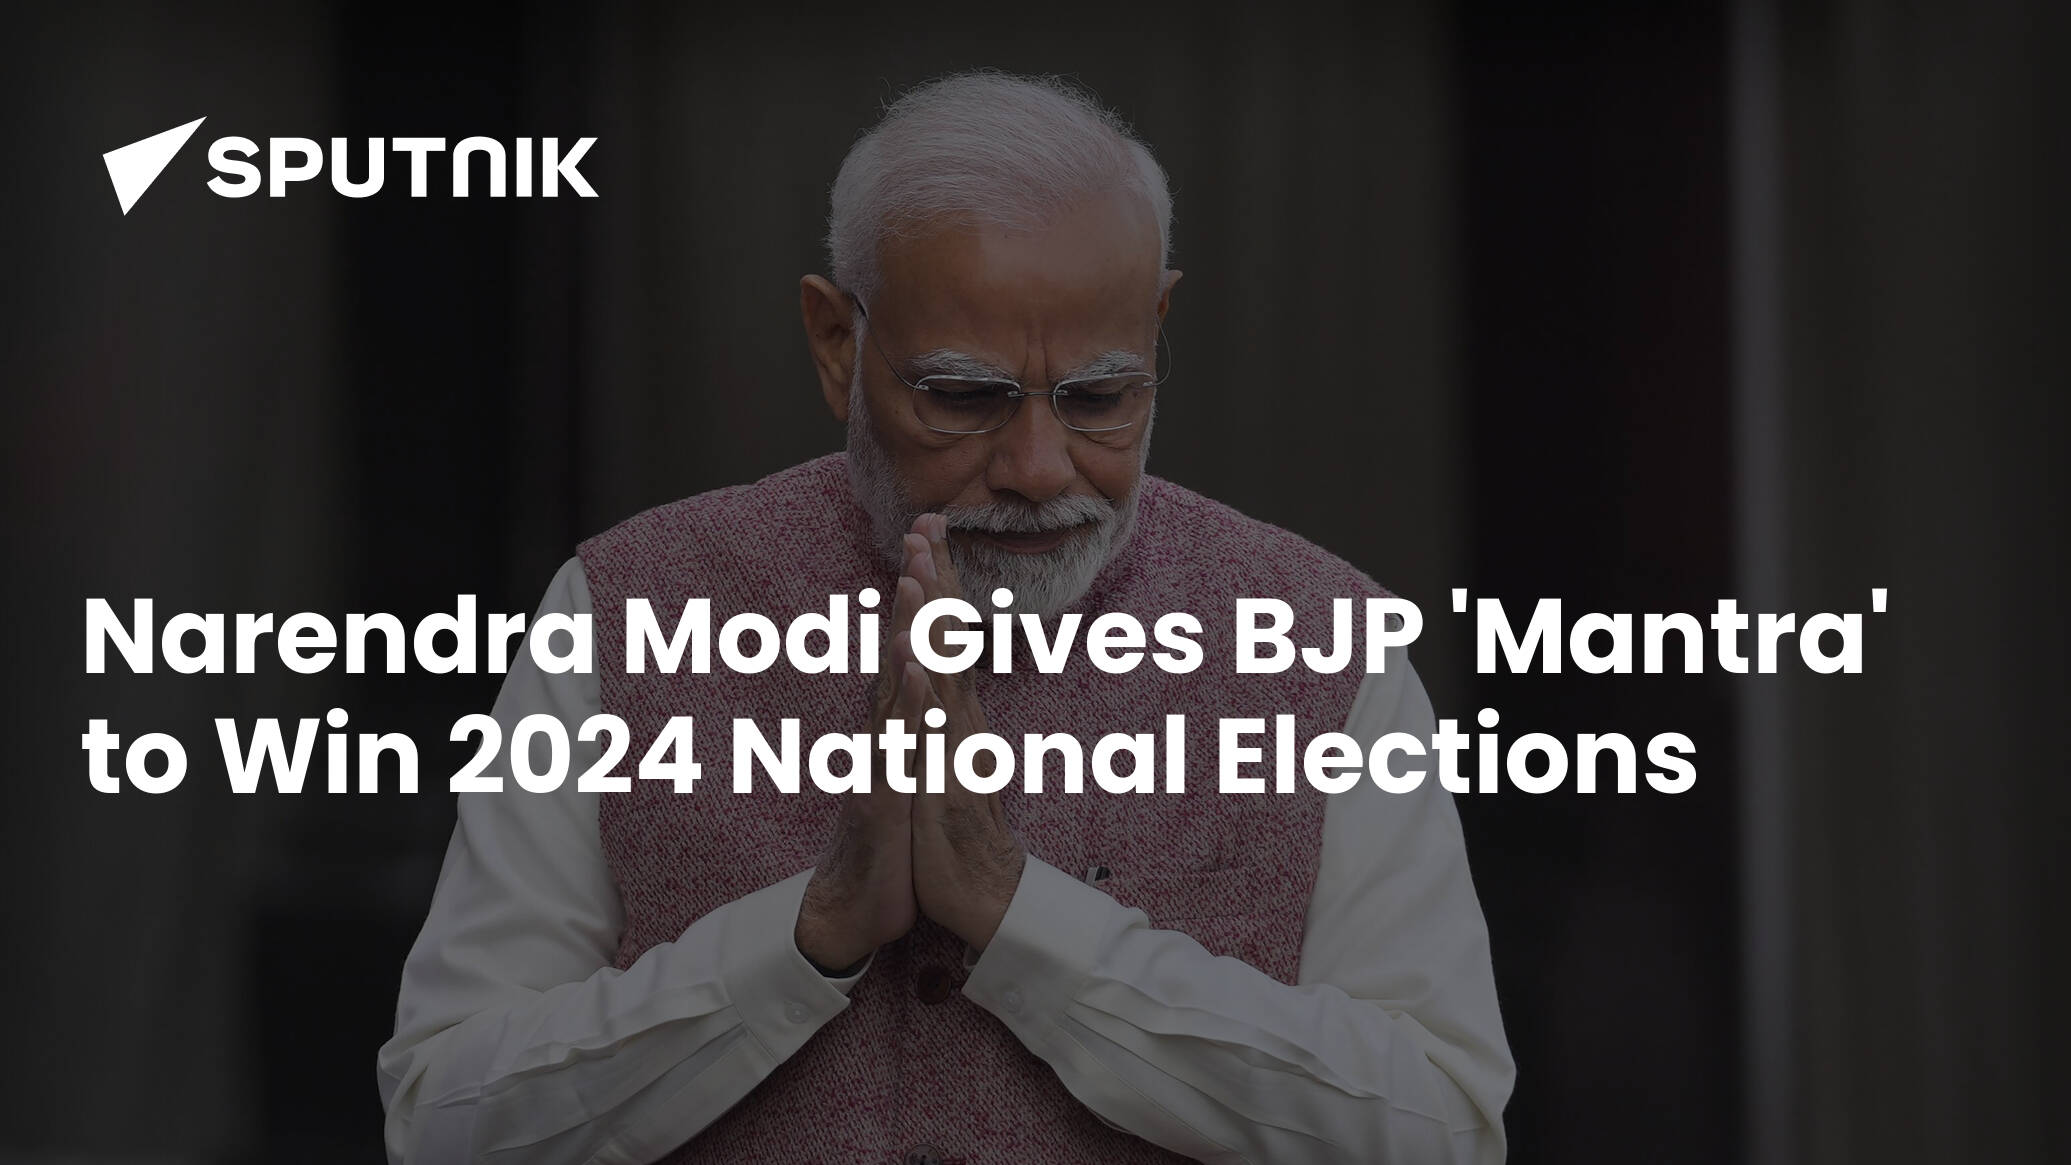 PM Modi Reveals 'Mantra' of Winning 2024 National Elections